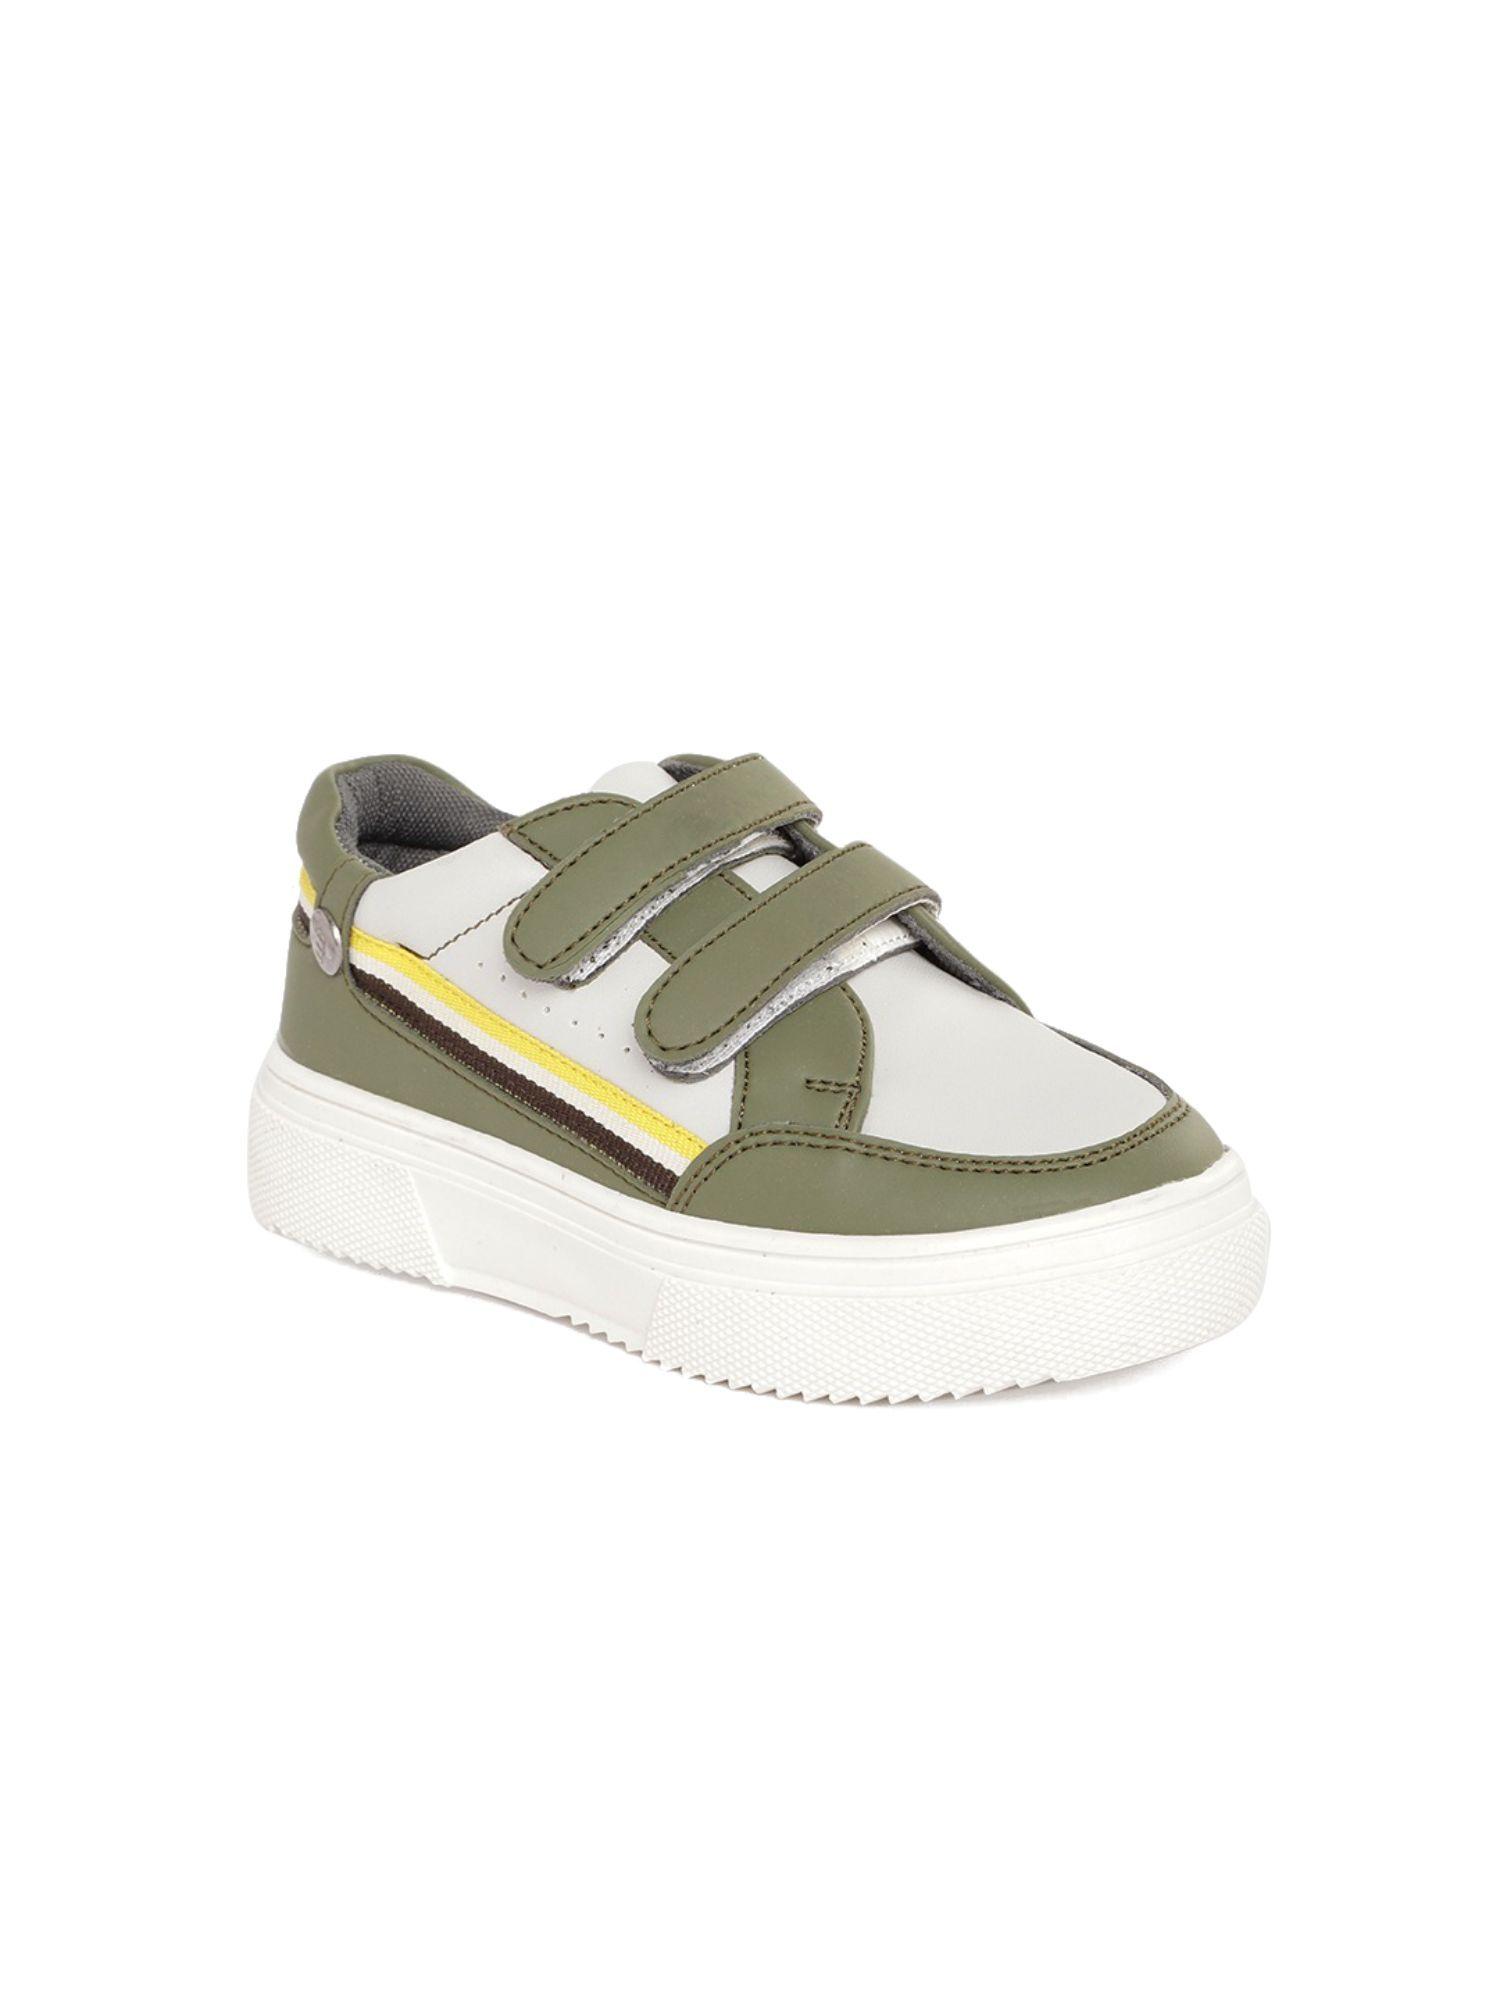 kids-boys-olive-&-white-casual-shoes